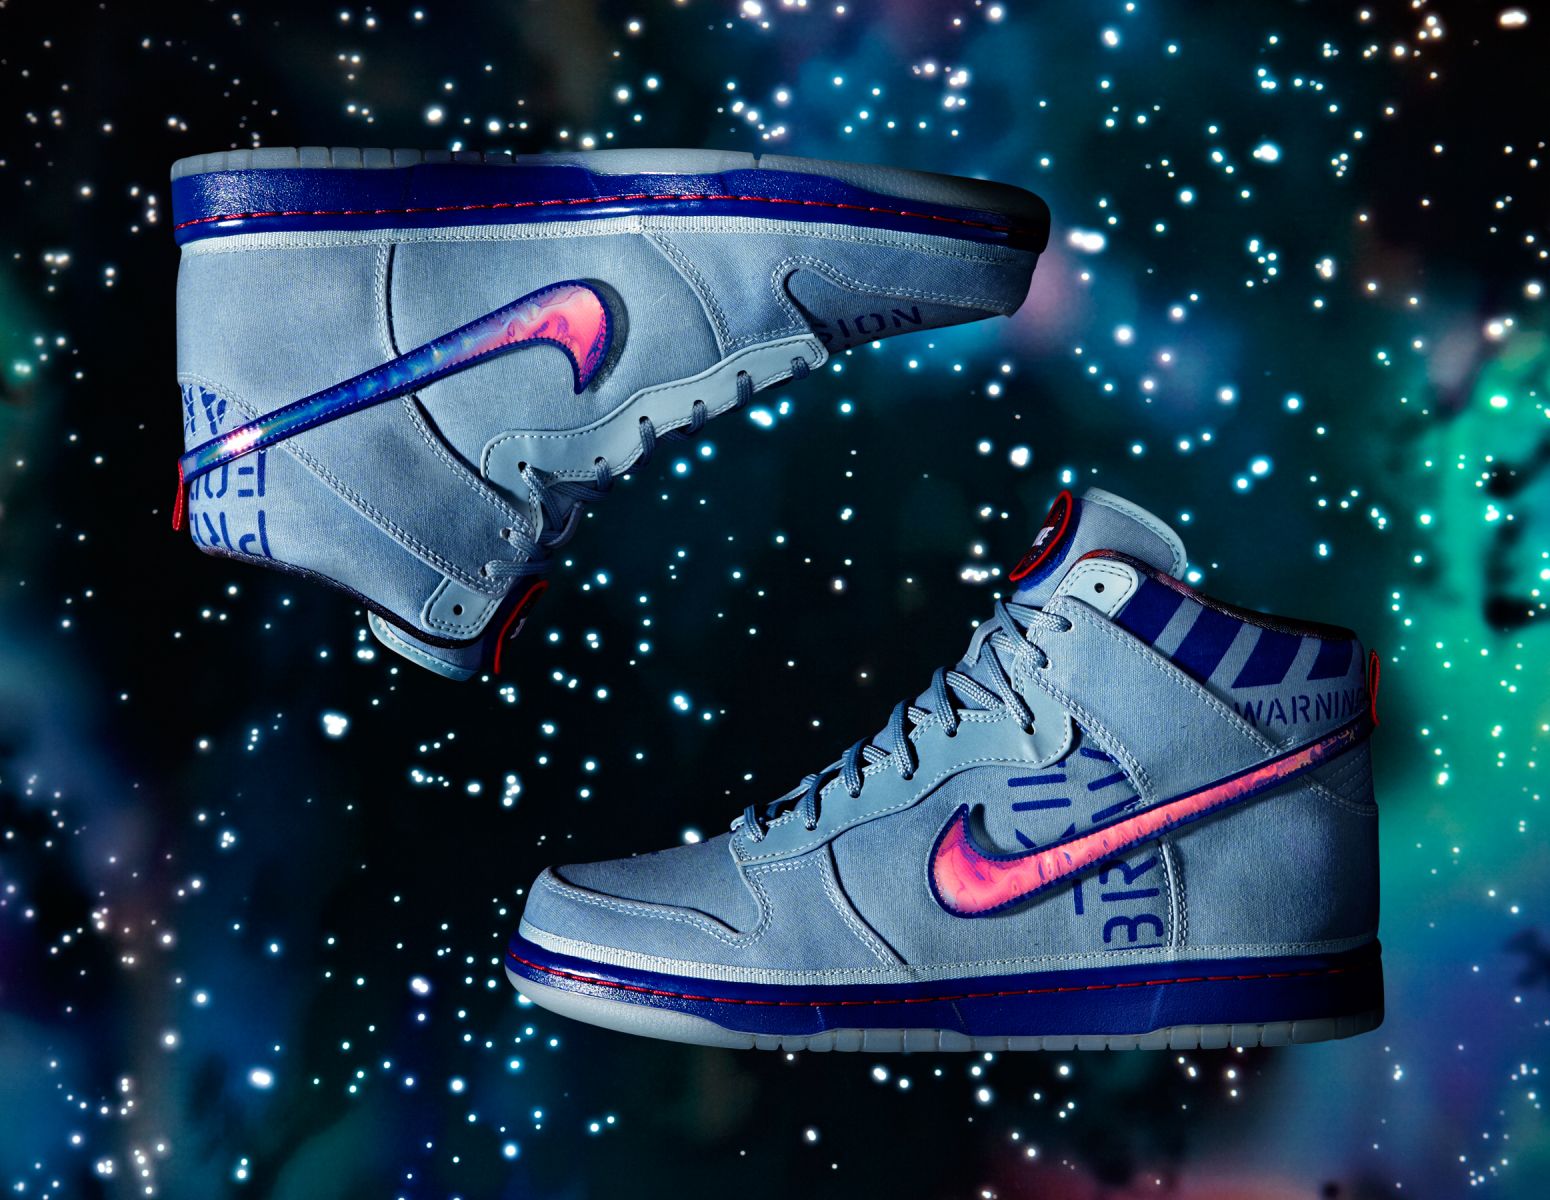 NSW Dunk High Premium - Galaxy All-Star Pack - Official Images ...